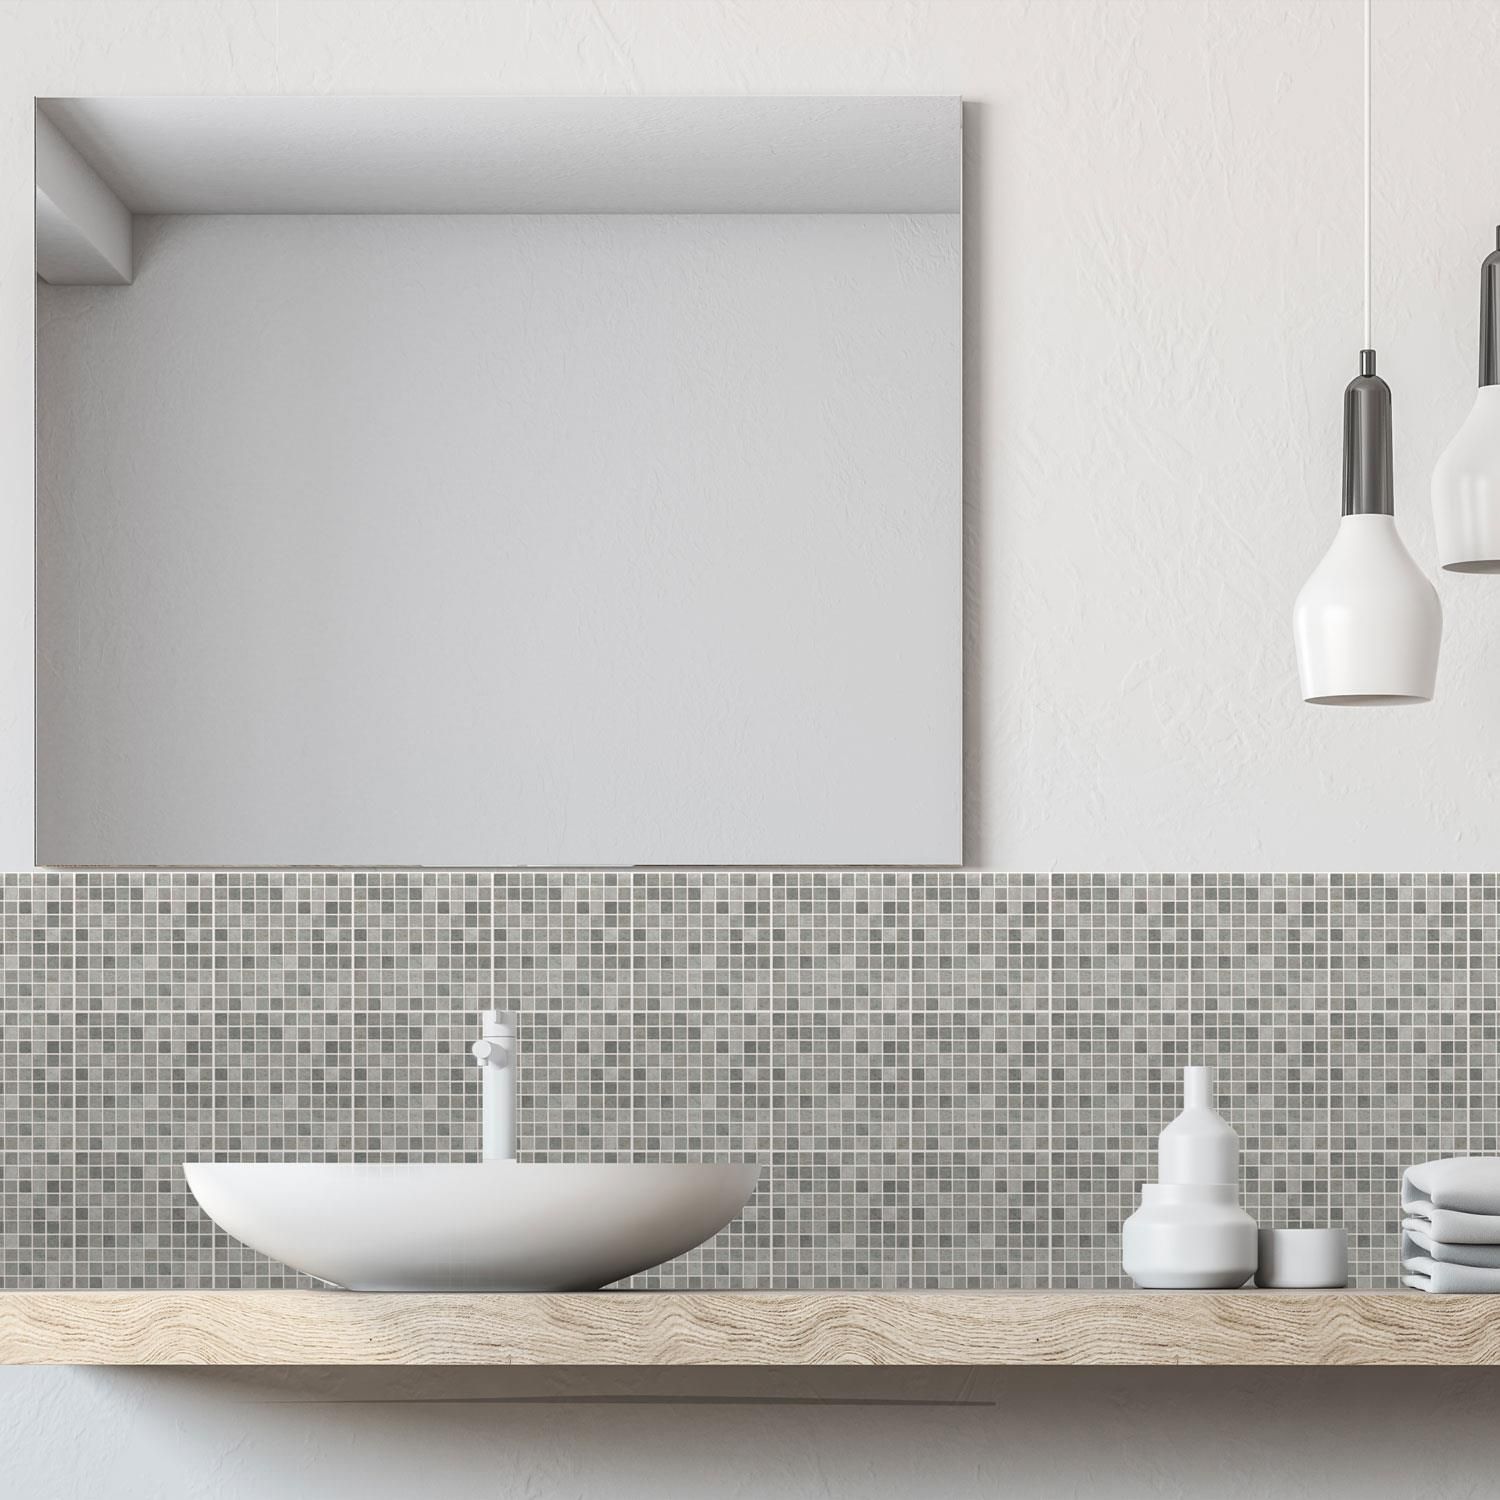 -Our new Natural Grey Limestone Mosaic Wall Tile Sticker Set gives any space a stunning aesthetic! 
-To apply, just peel and stick onto any clean, flat surfaces like wall, furniture or as window screen, and you are good to go! 
- Please note that due to different devices and screen settings, the colour of the webpage picture you see may have a certain colour difference from the actual product.
- Package Contains  24 pieces of stickers 15 cm (6 in). Coverage area: 0.54 square meters